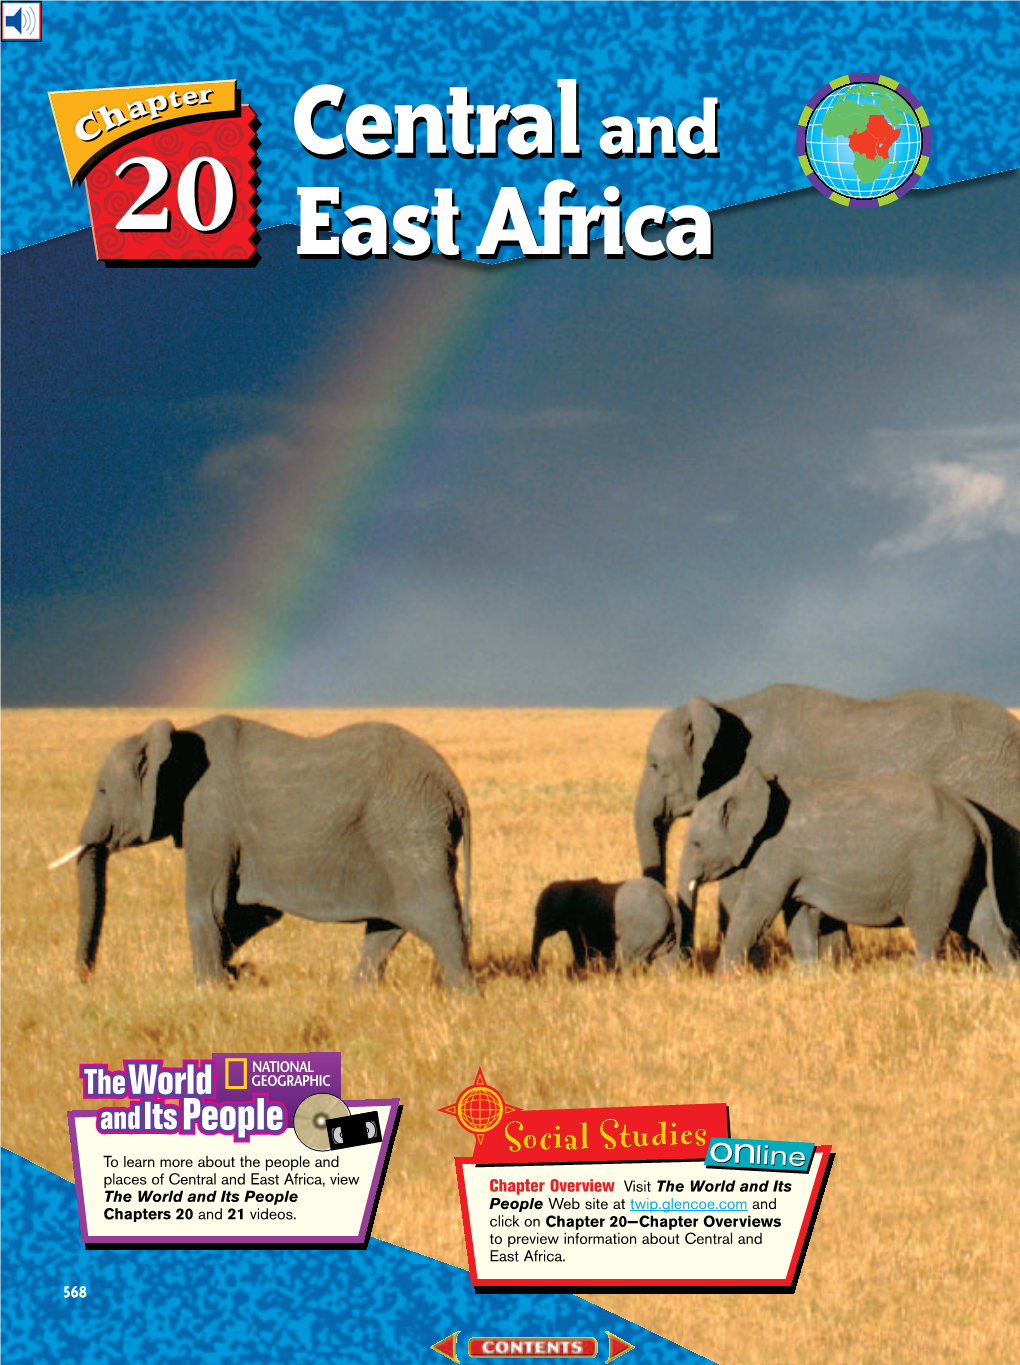 Chapter 20: Central and East Africa